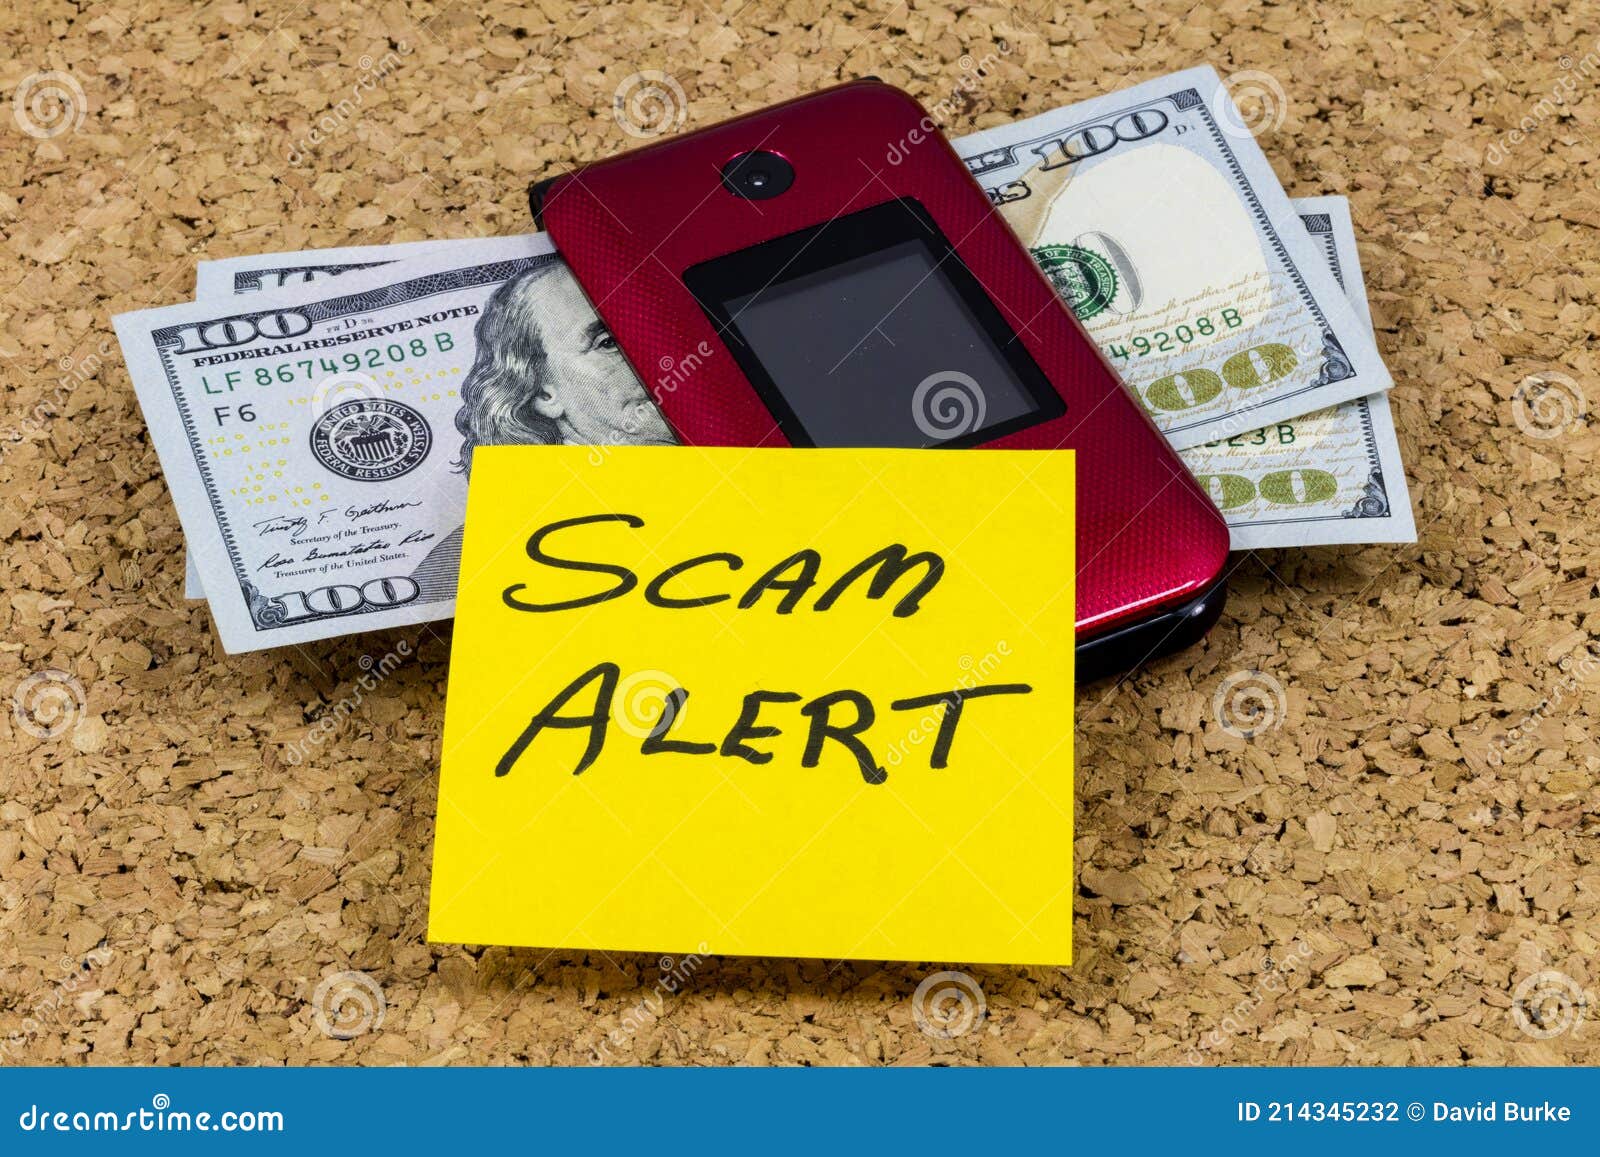 scam alert online computer cell phone financial security threat